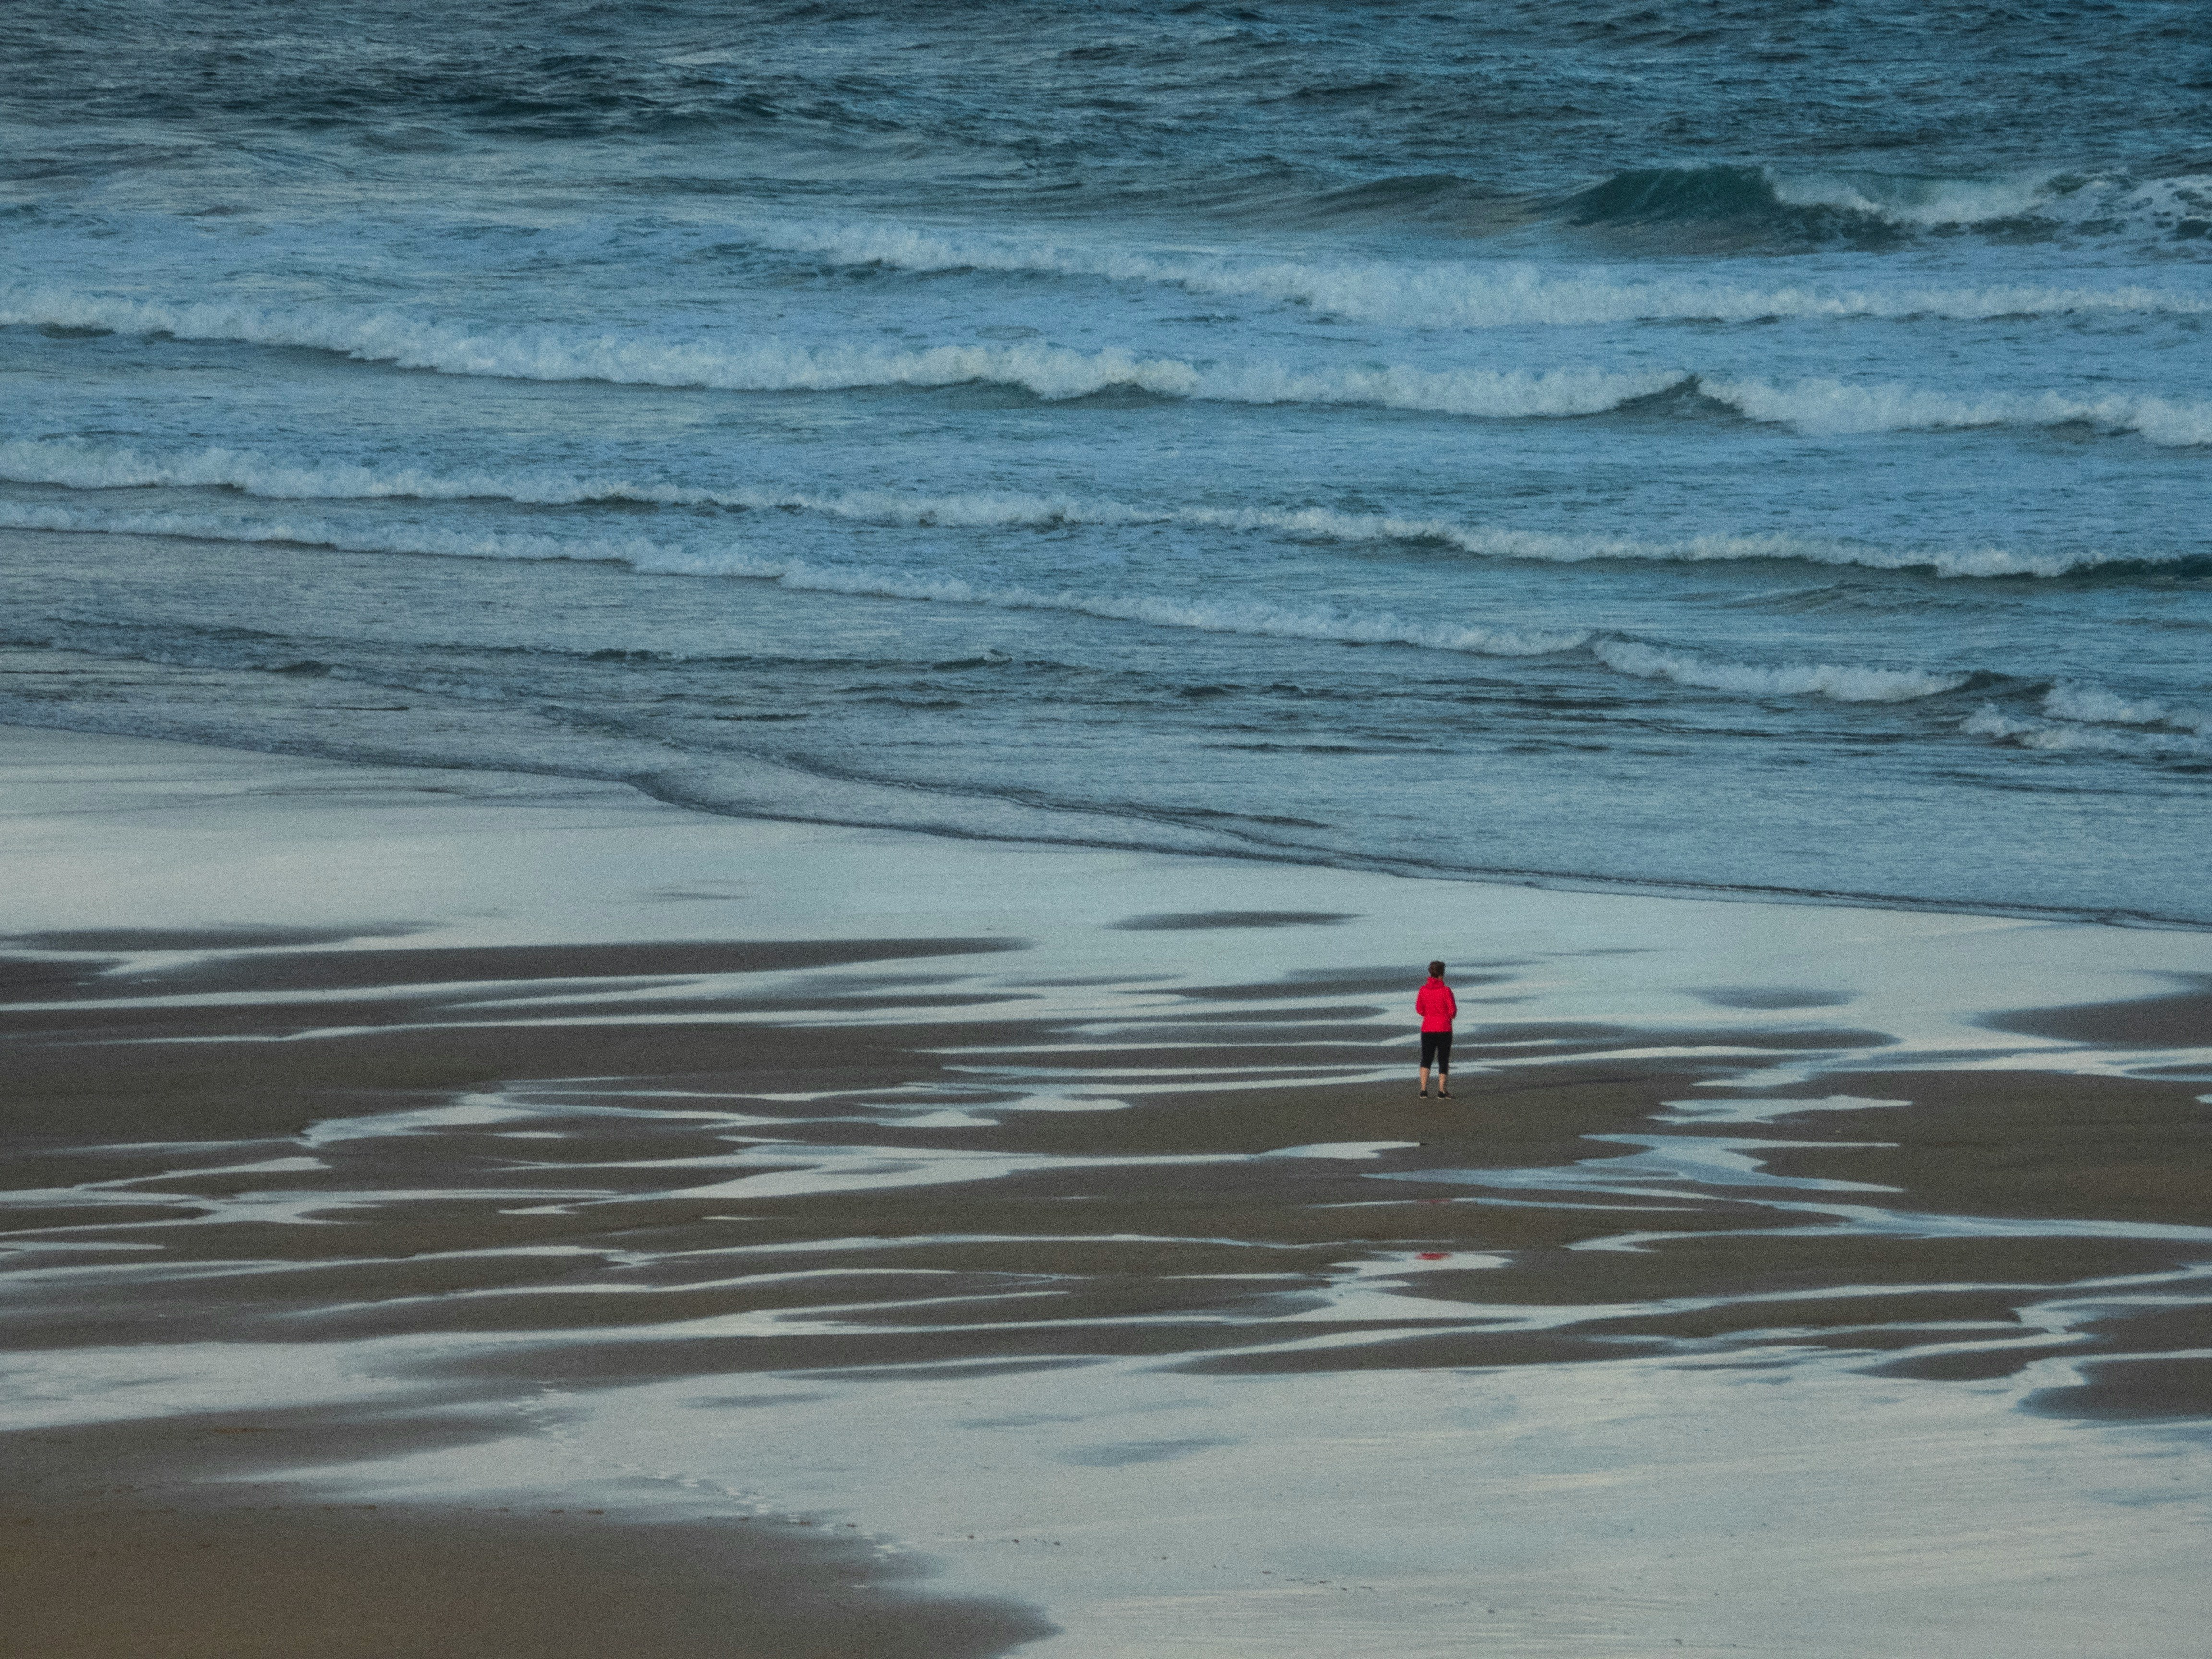 person wearing red shirt standing on seashore